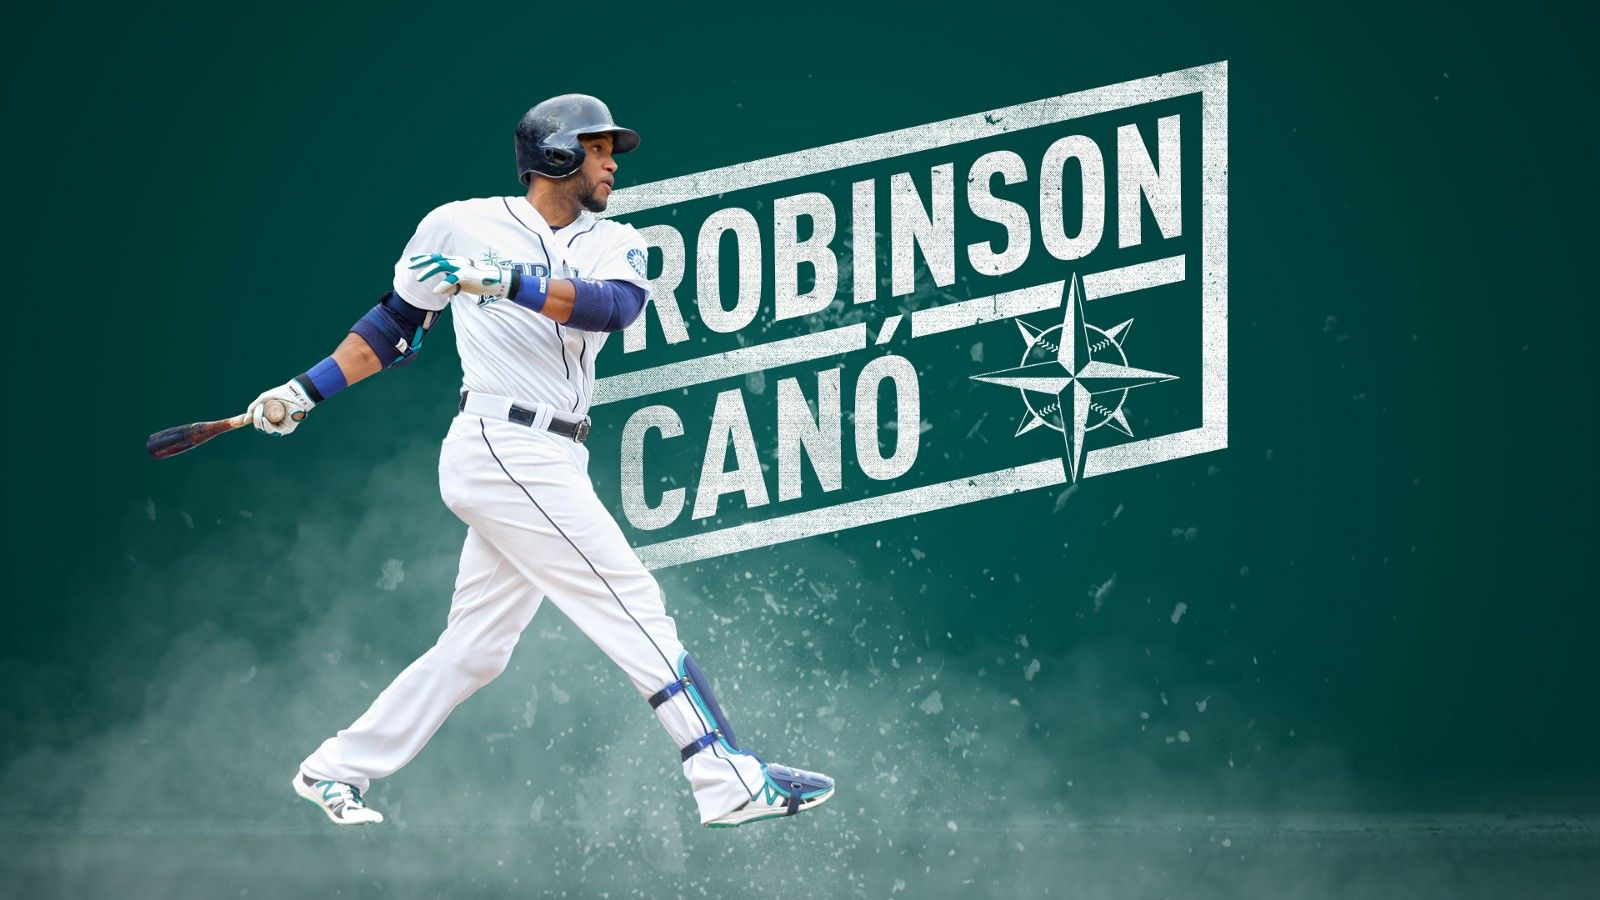 Image Result For Robinson Cano Mariners Wallpaper